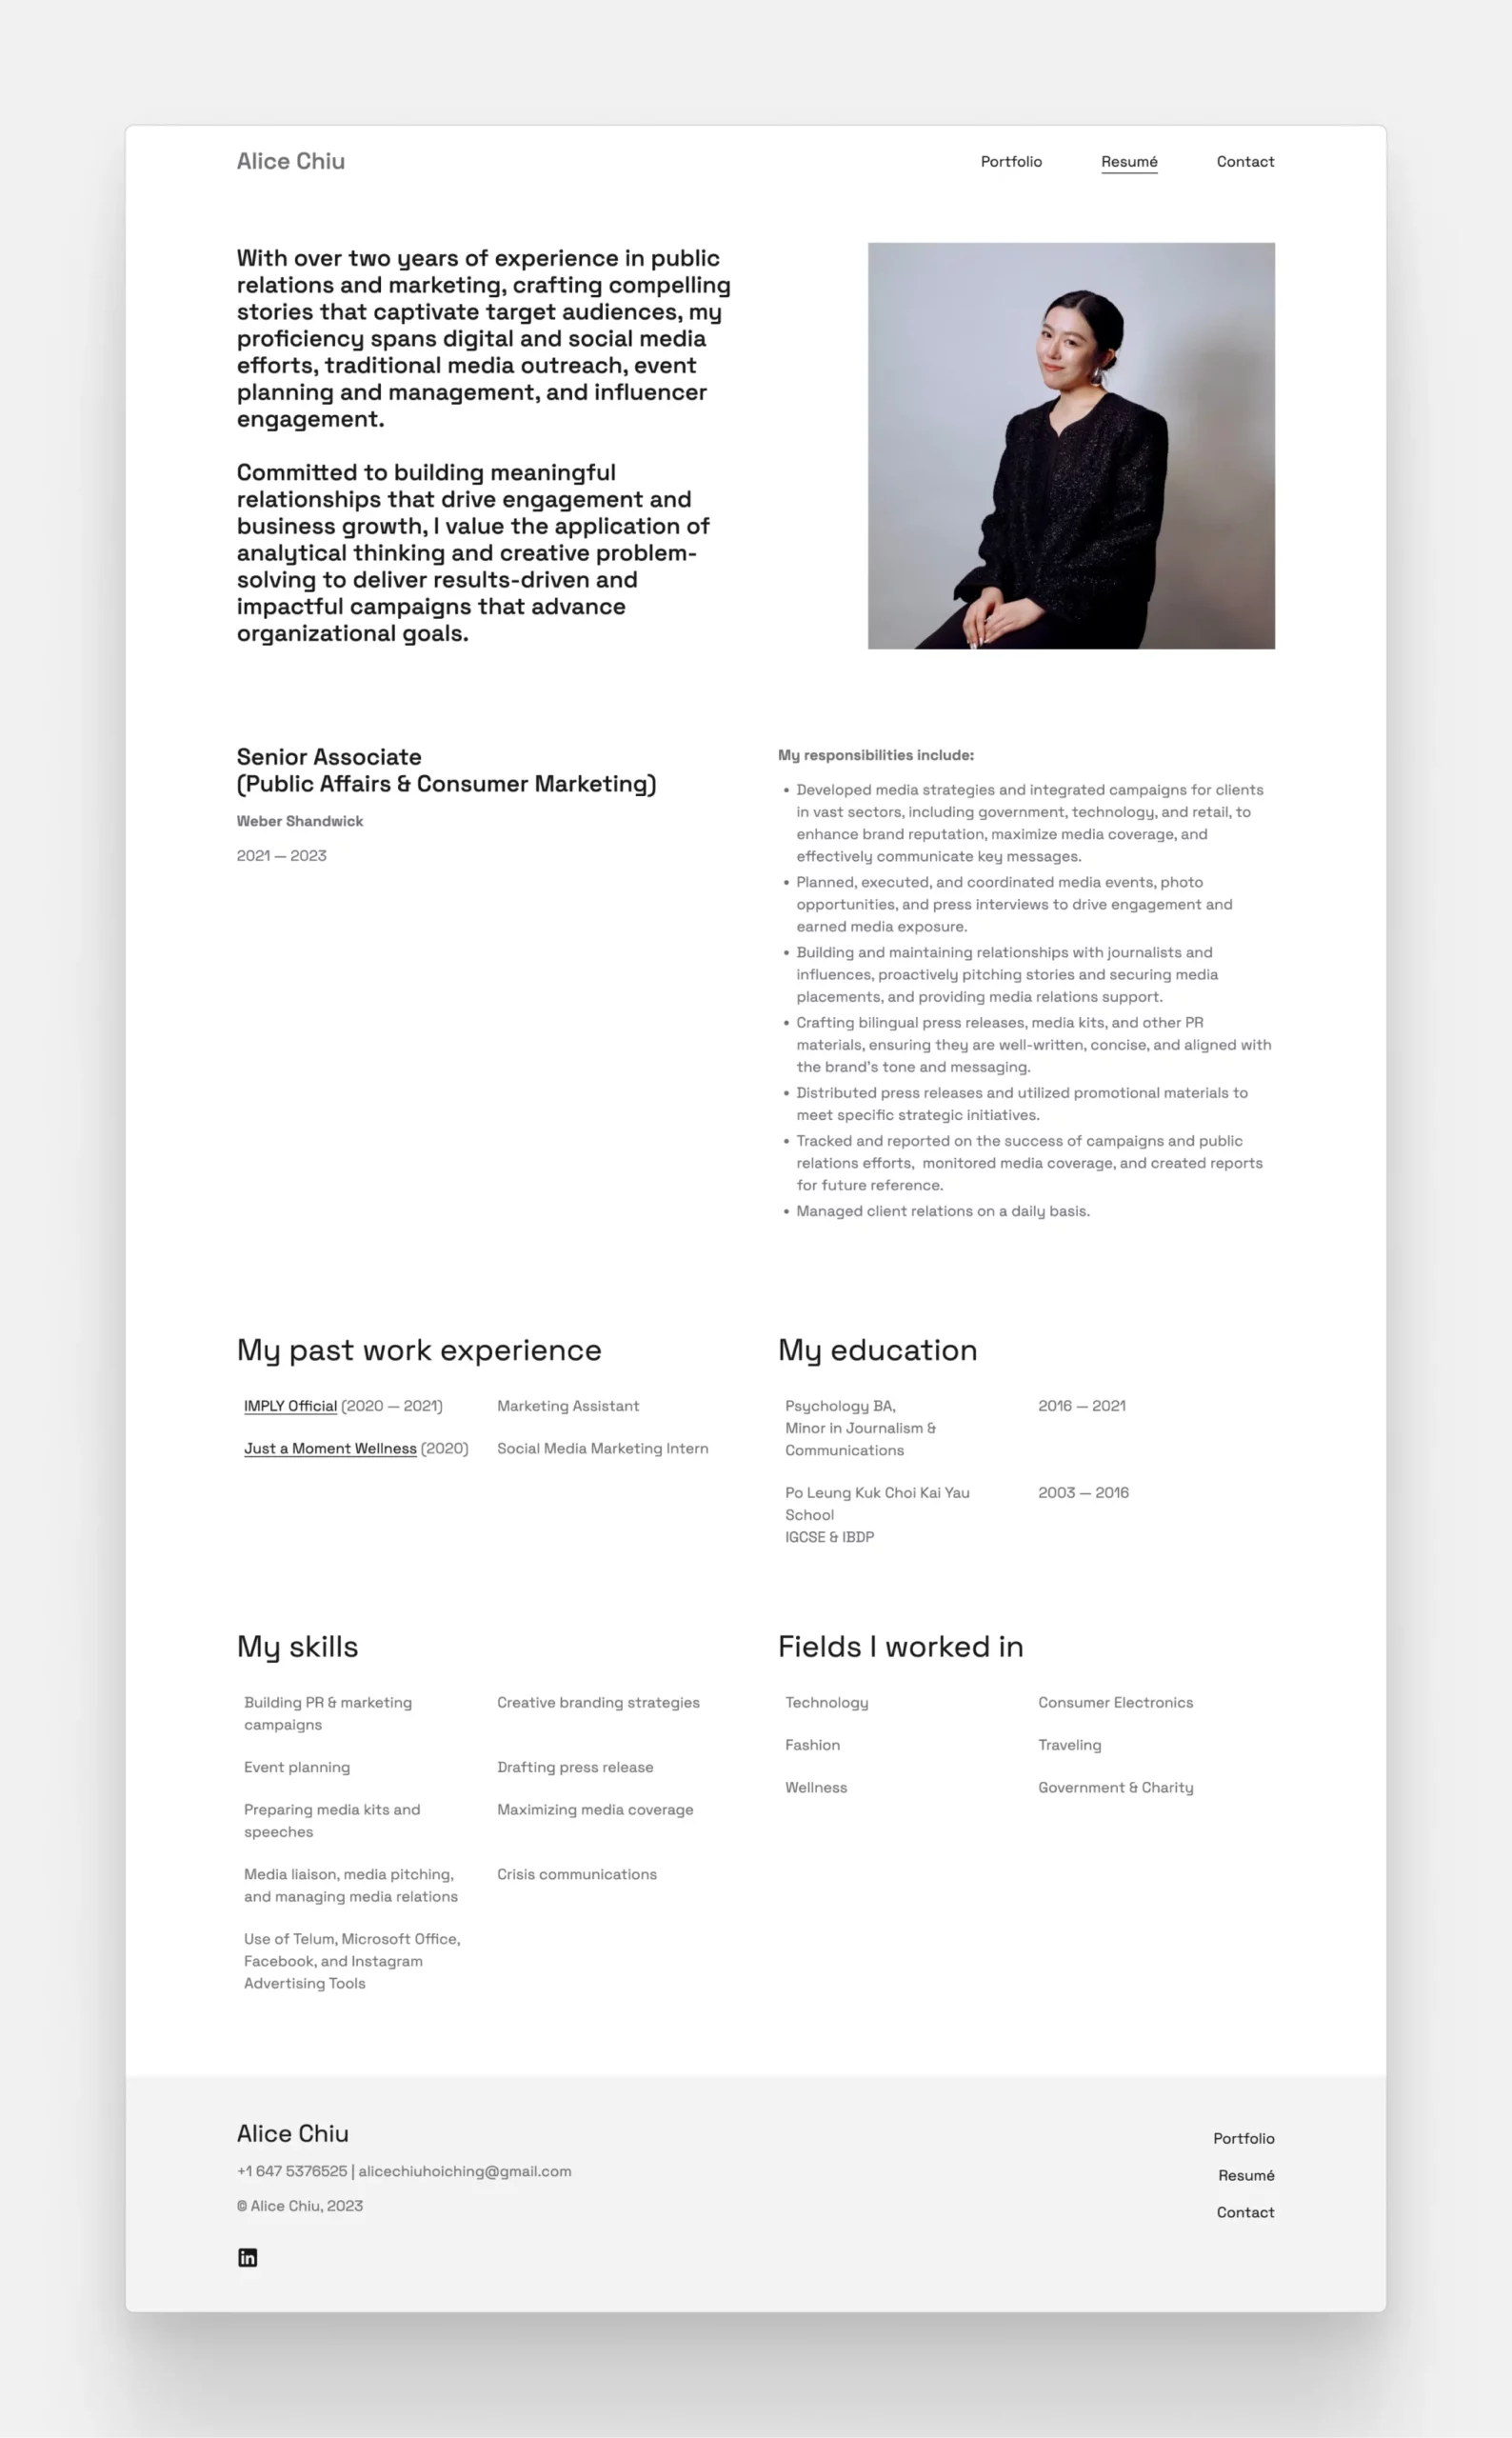 The resume of senior PR professional Alice Chiu, featuring an introduction section with a photo of her, then the traditional resume content: work history and educational background